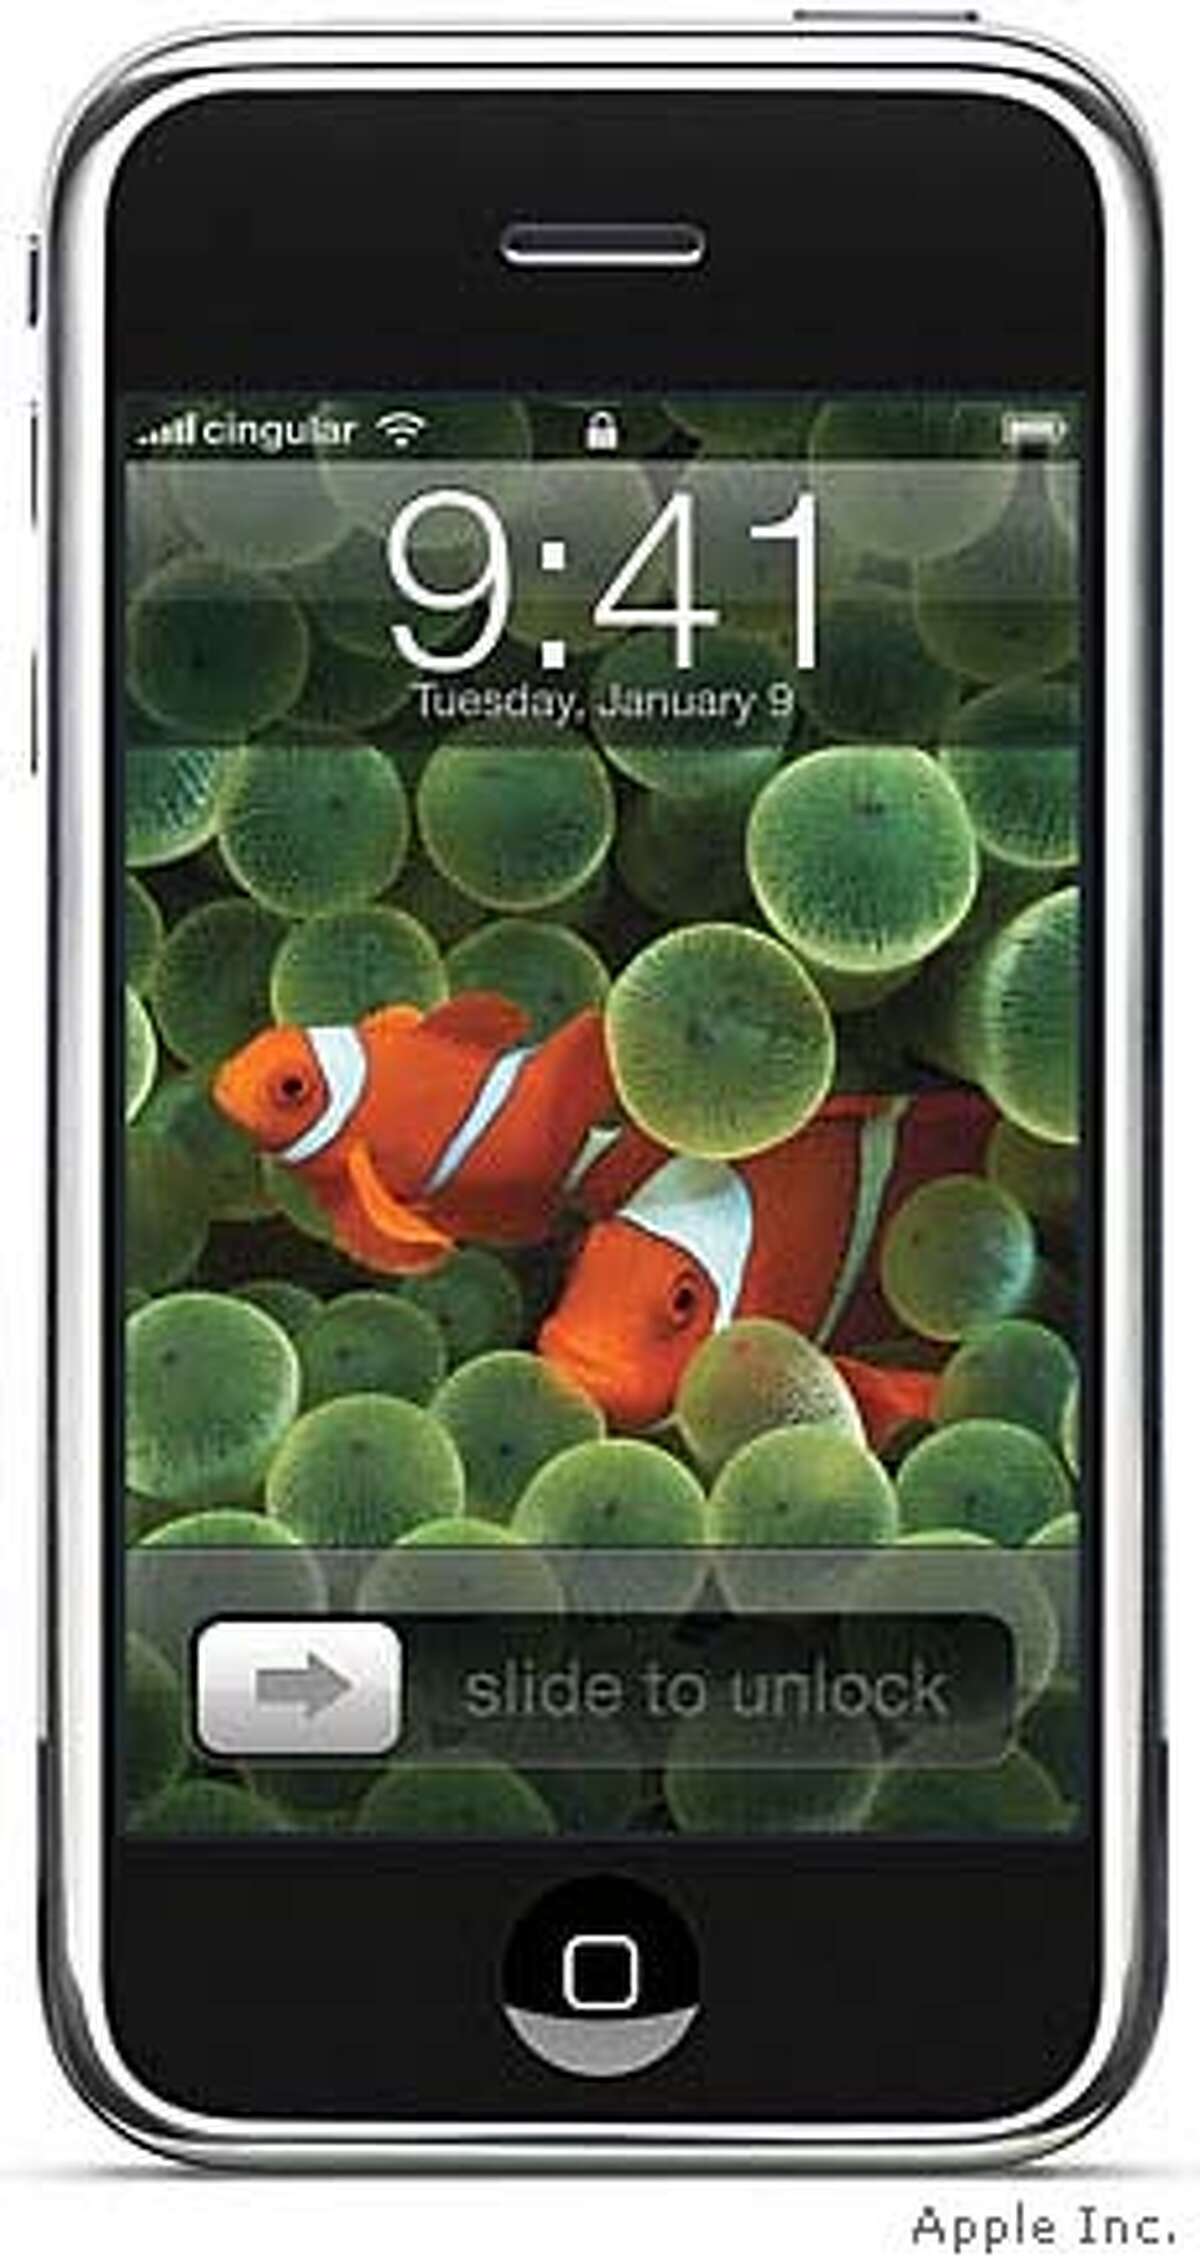 The iPhone is a combination widescreen iPod, cell phone and Web browser. Photo courtesy of Apple Inc.